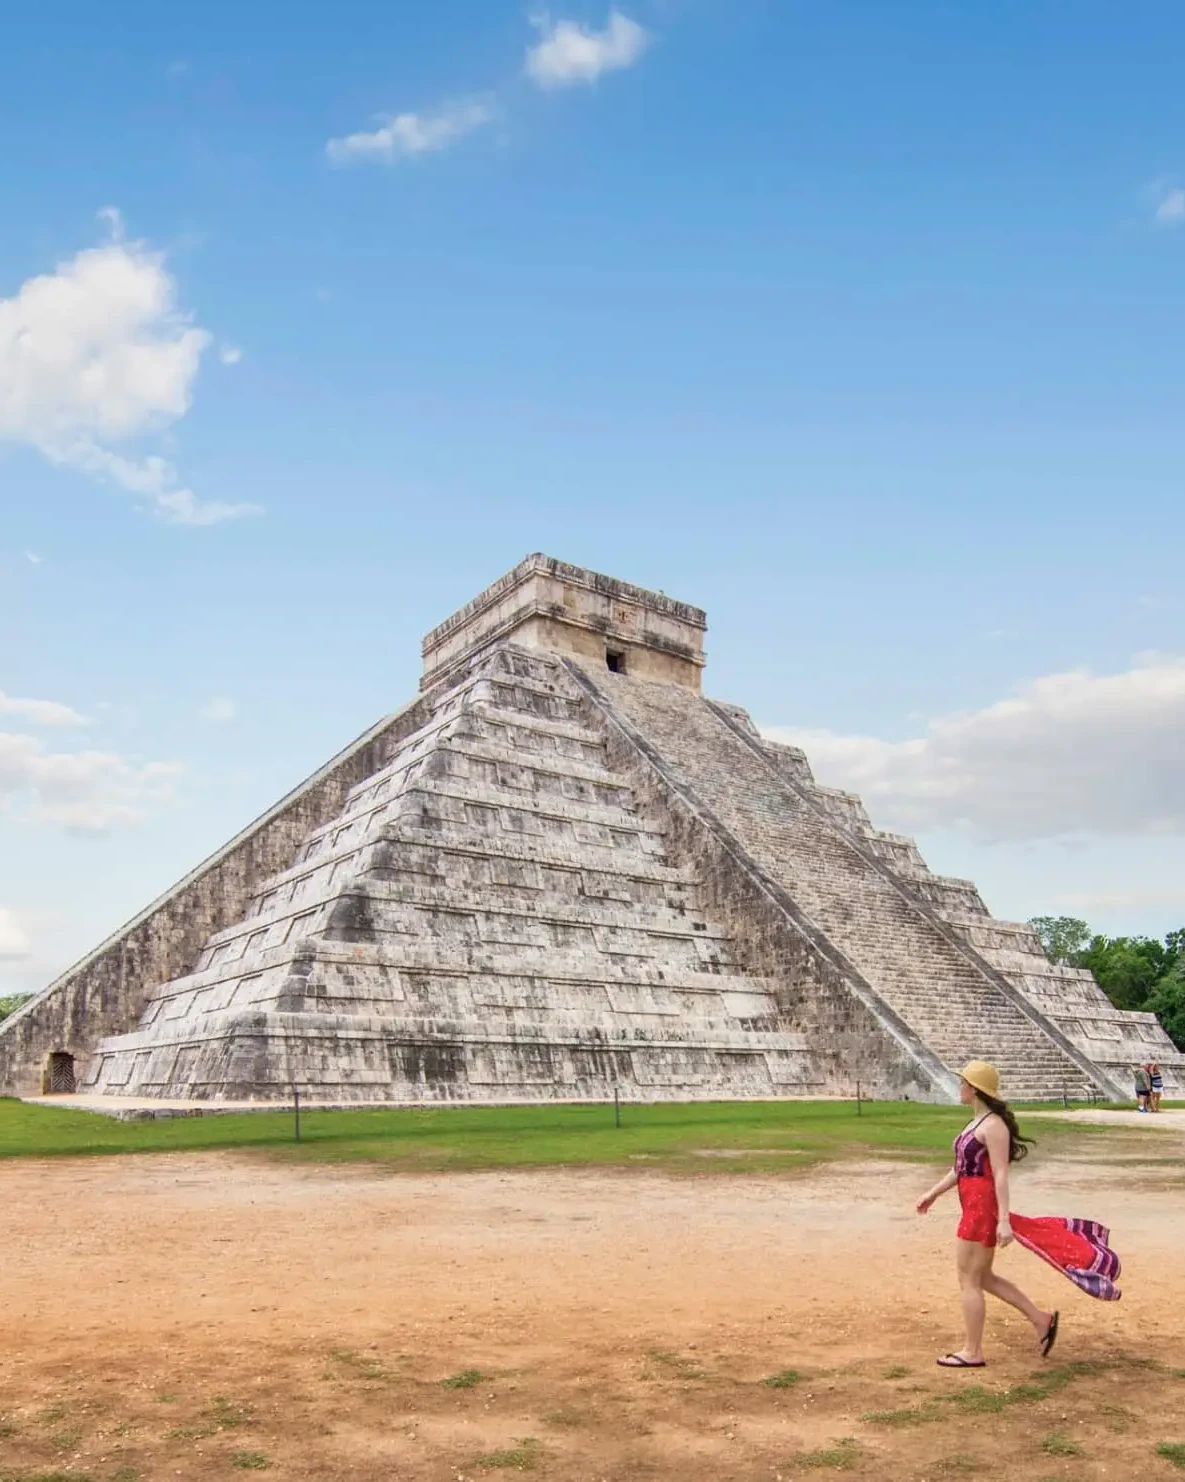 A woman in red dress walking on dirt near a pyramid.